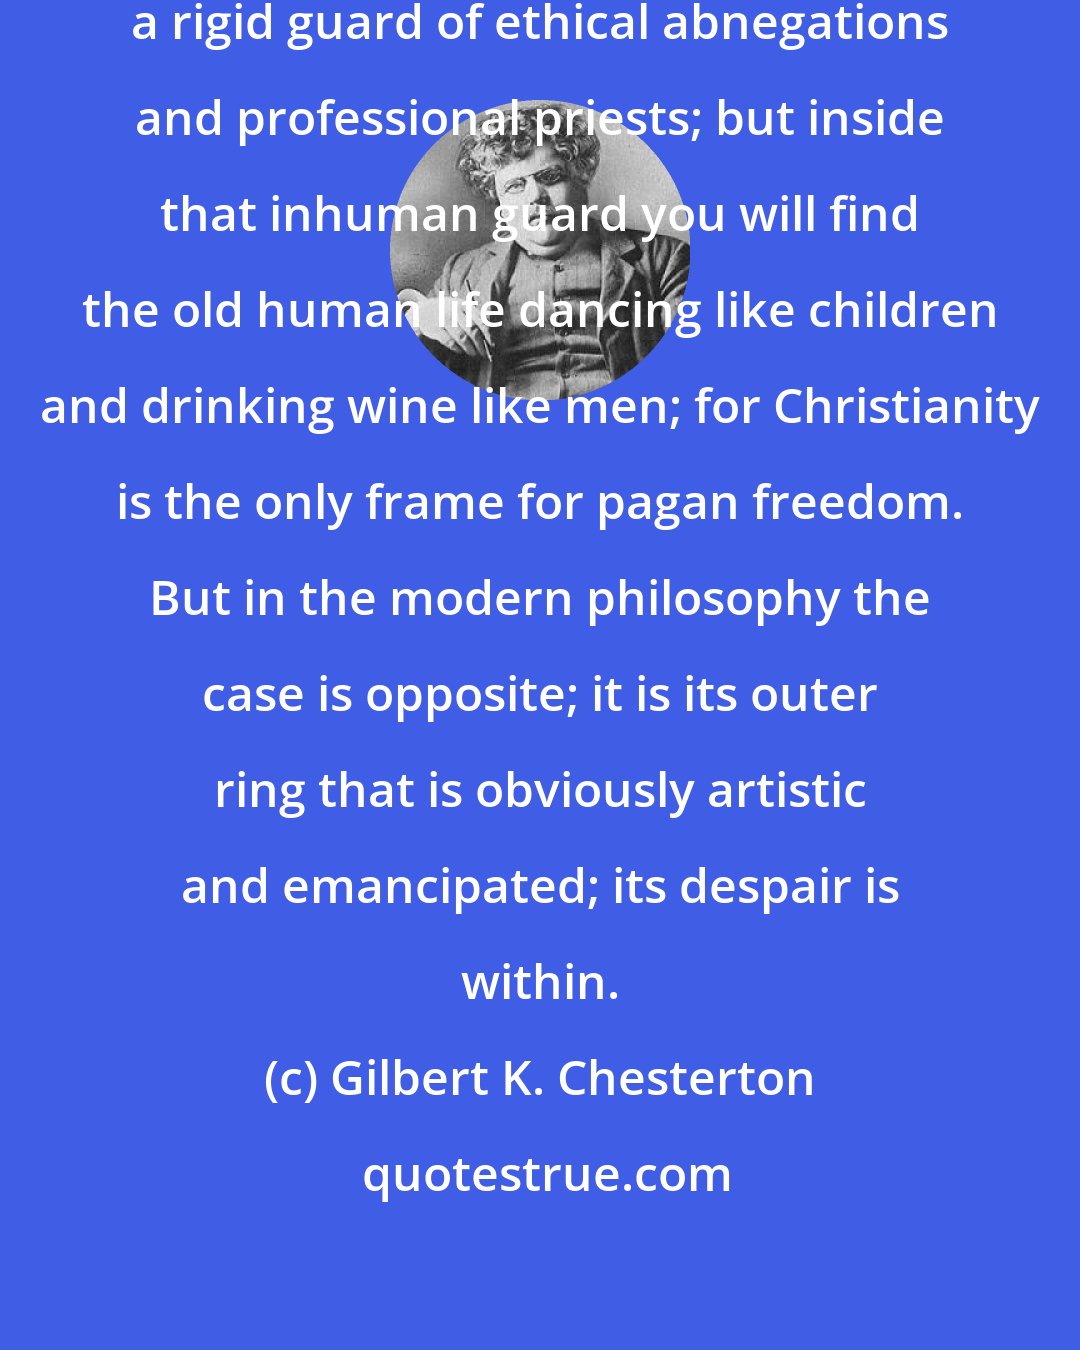 Gilbert K. Chesterton: The outer ring of Christianity is a rigid guard of ethical abnegations and professional priests; but inside that inhuman guard you will find the old human life dancing like children and drinking wine like men; for Christianity is the only frame for pagan freedom. But in the modern philosophy the case is opposite; it is its outer ring that is obviously artistic and emancipated; its despair is within.